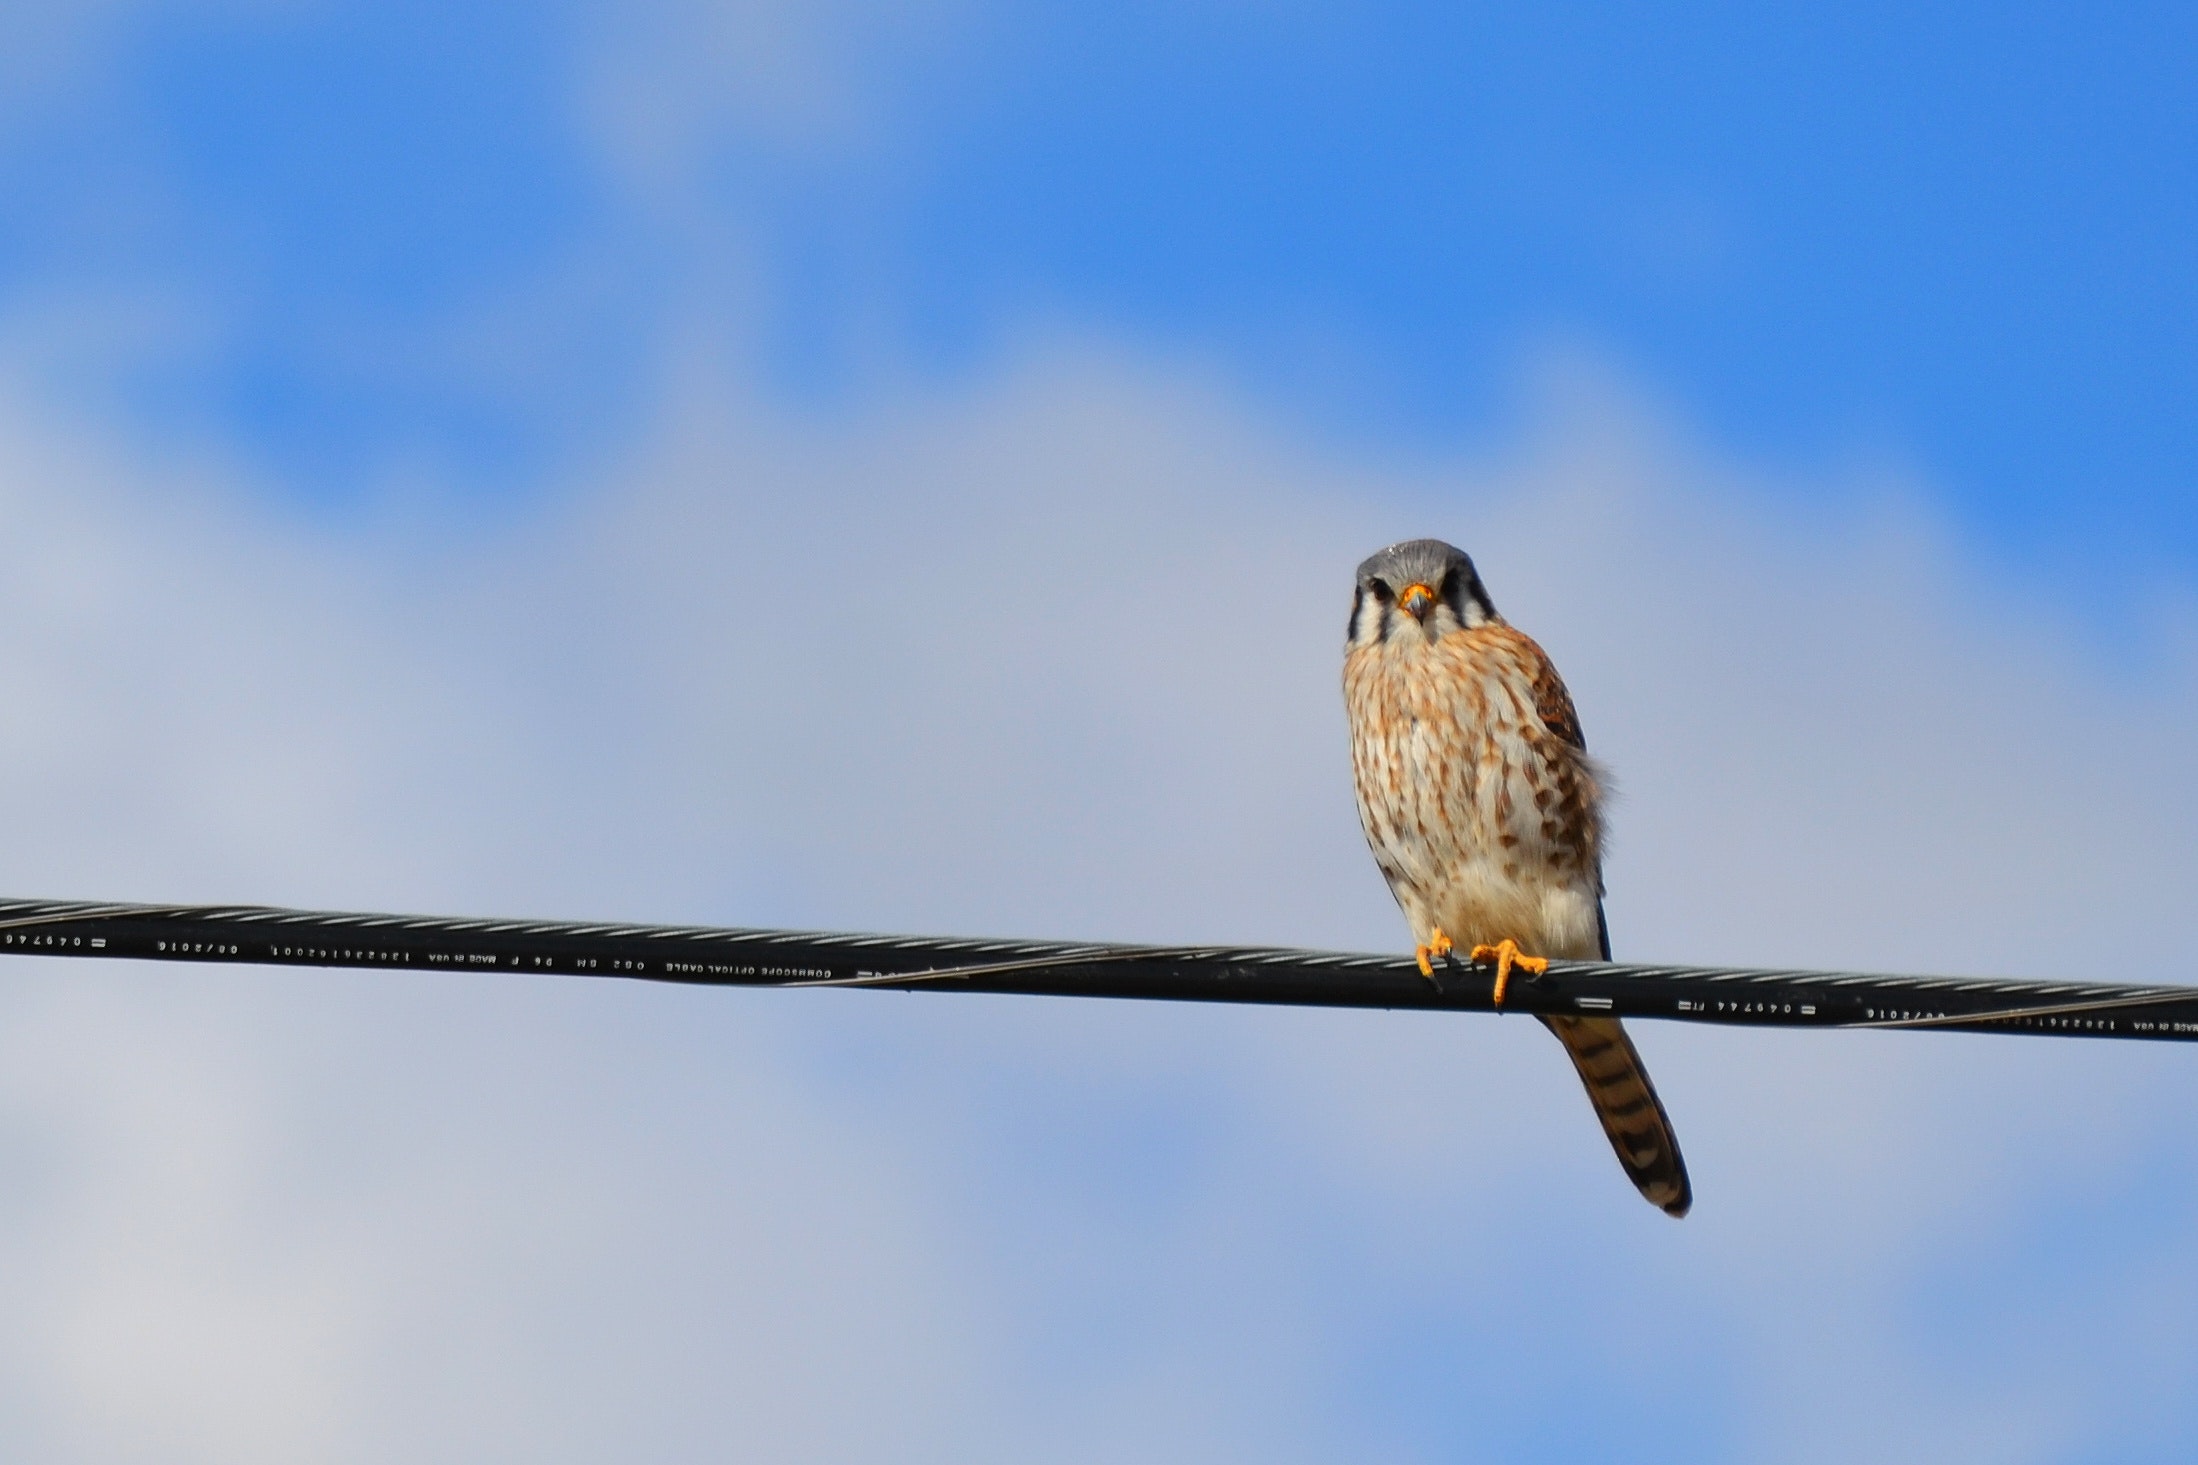 A little bird sitting on a wire photo